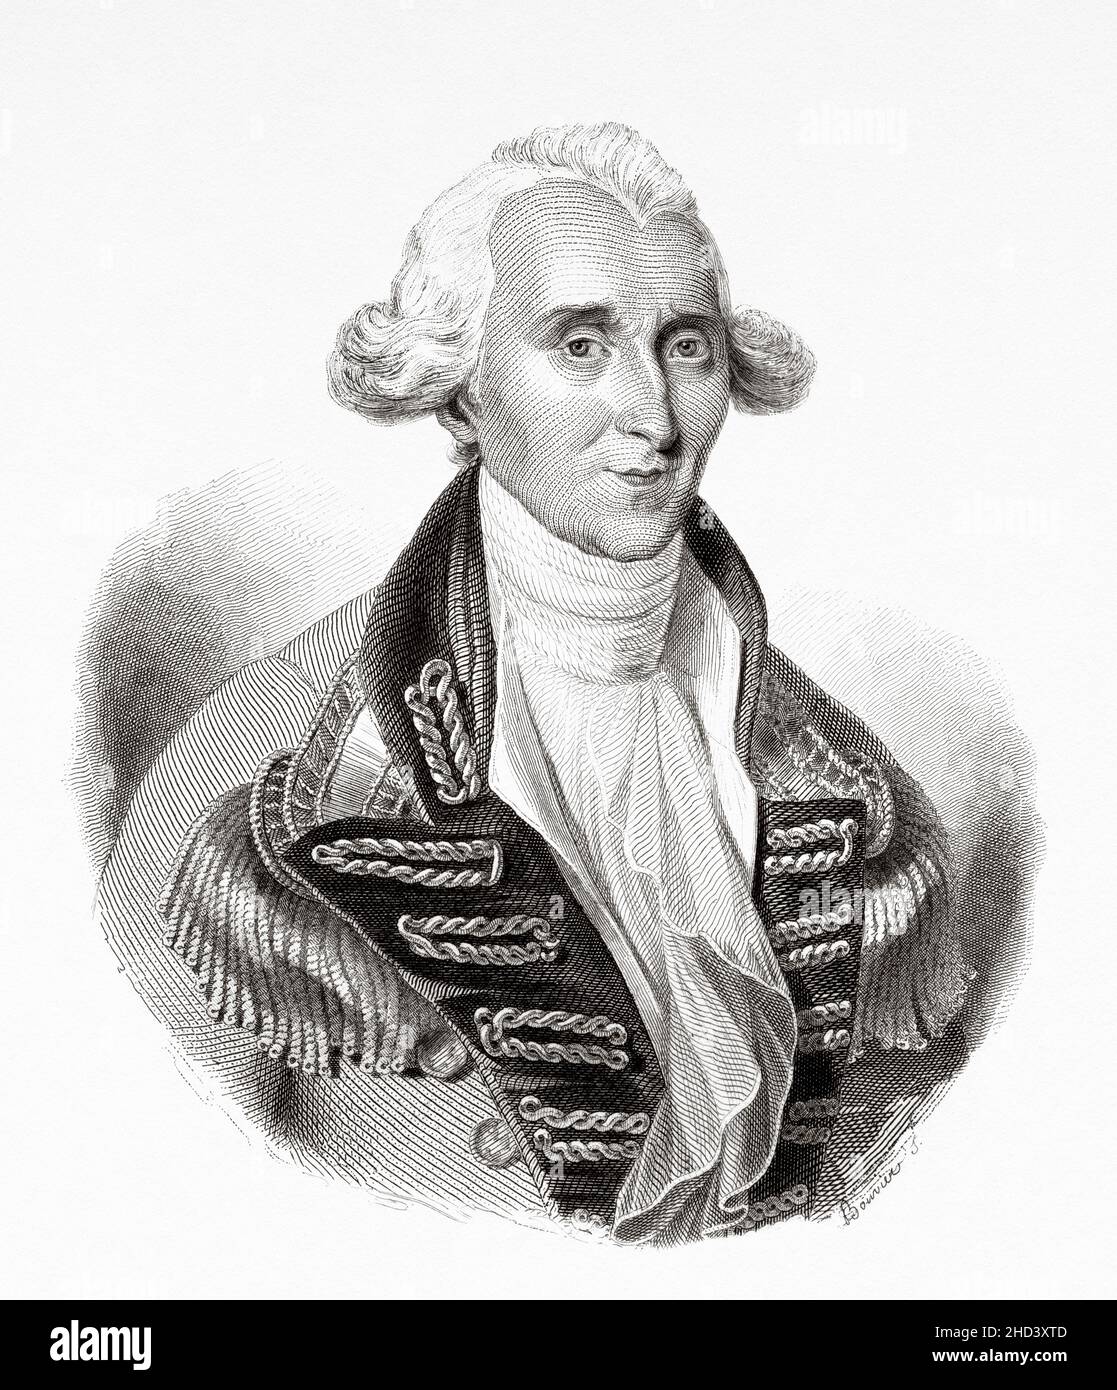 Major-General Claude Martin (1735-1800) was a French army officer who served in the French, and later British East India companies in colonial India. Martin rose to the rank of major-general in the British East India Company's Bengal Army. France. Europe. Old 19th century engraved illustration from Portraits et histoire des hommes utile by Societe Montyon et Franklin 1837 Stock Photo